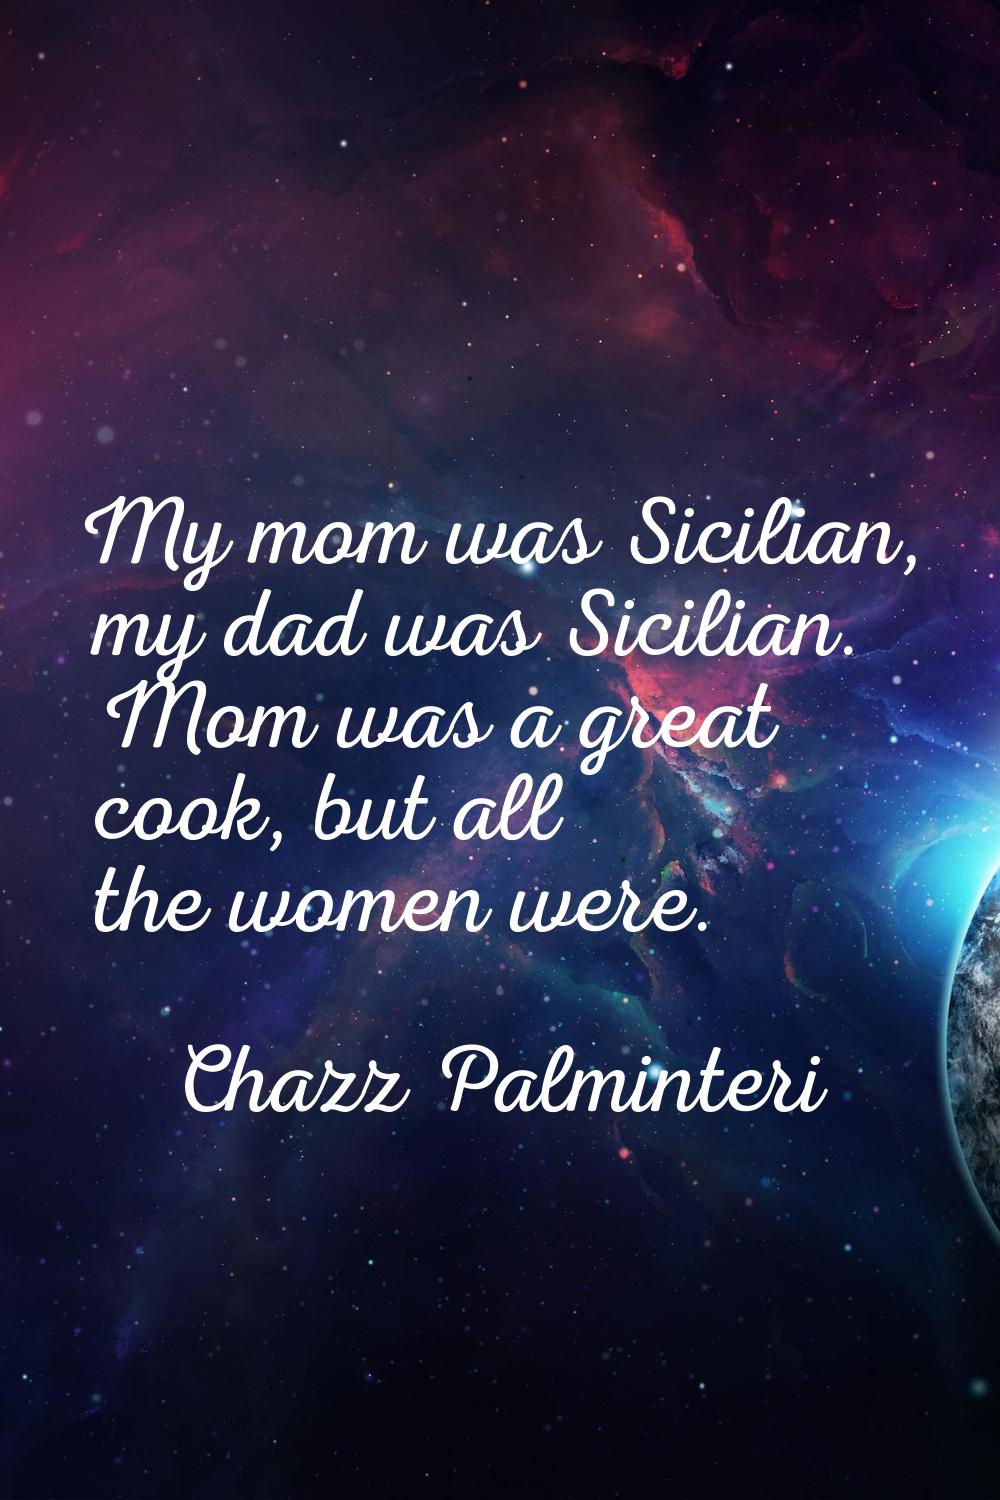 My mom was Sicilian, my dad was Sicilian. Mom was a great cook, but all the women were.